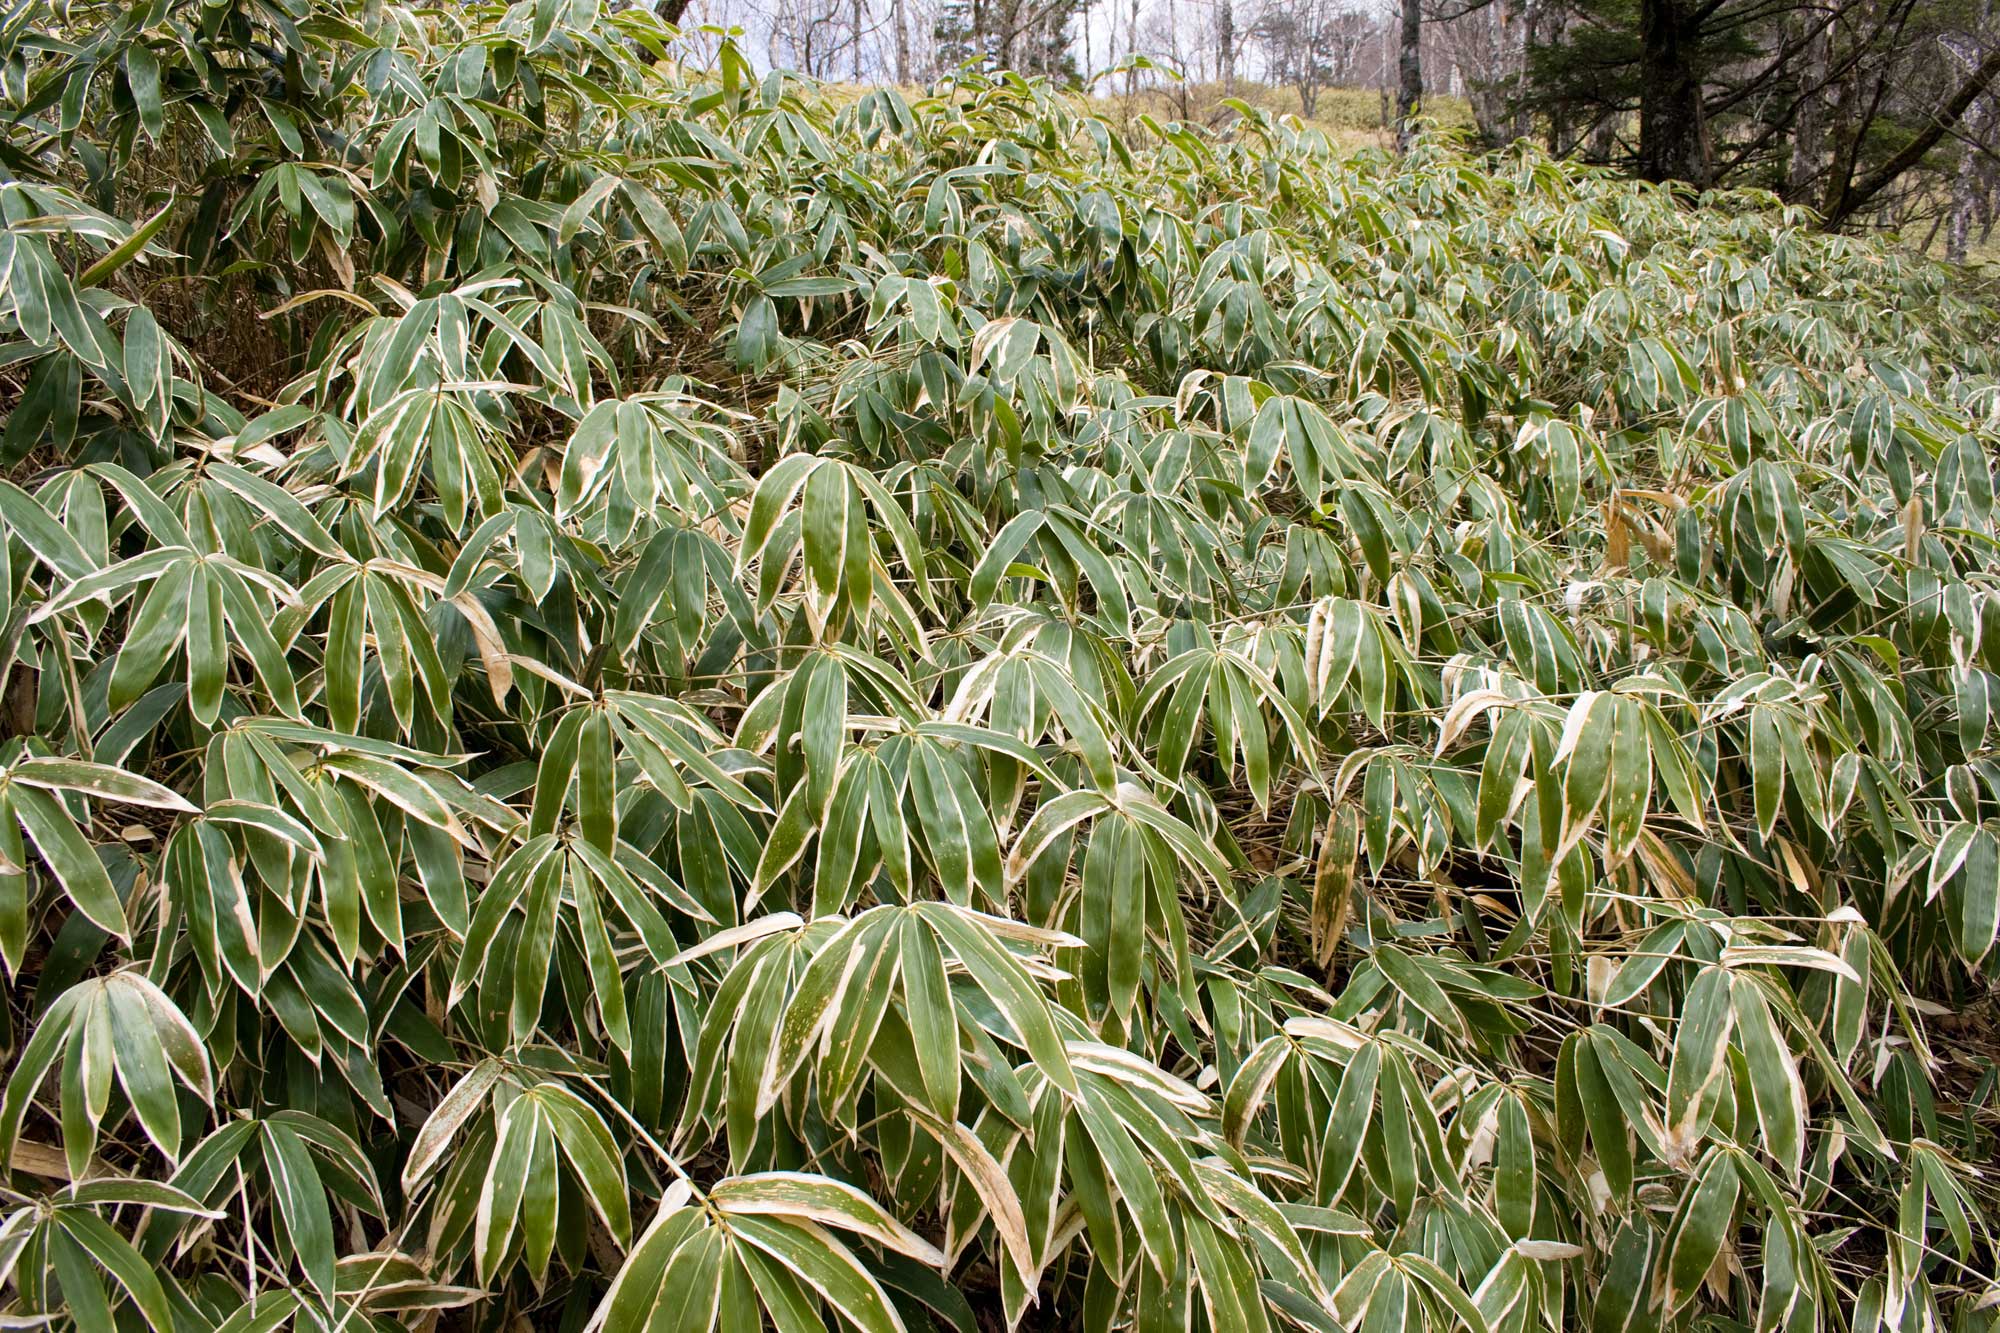 Photograph of a kumazasa, a type of temperate woody bamboo. The photo shows dense bamboo foliage. Each group of leaves is clustered at the end of a thin stem. The leaves are green with off-white margins.